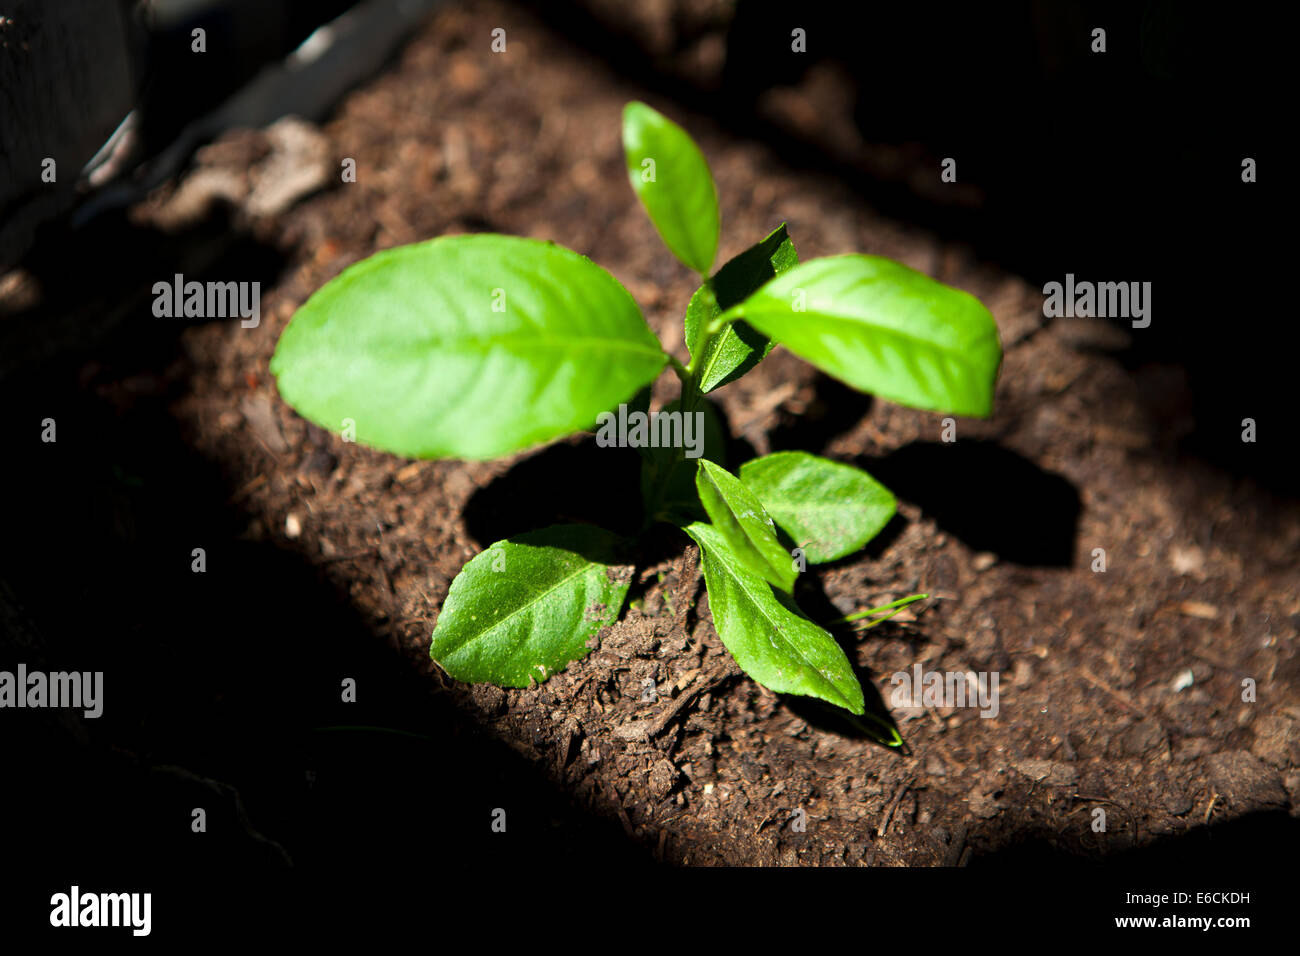 Chilly Peper Plant on a garden Stock Photo